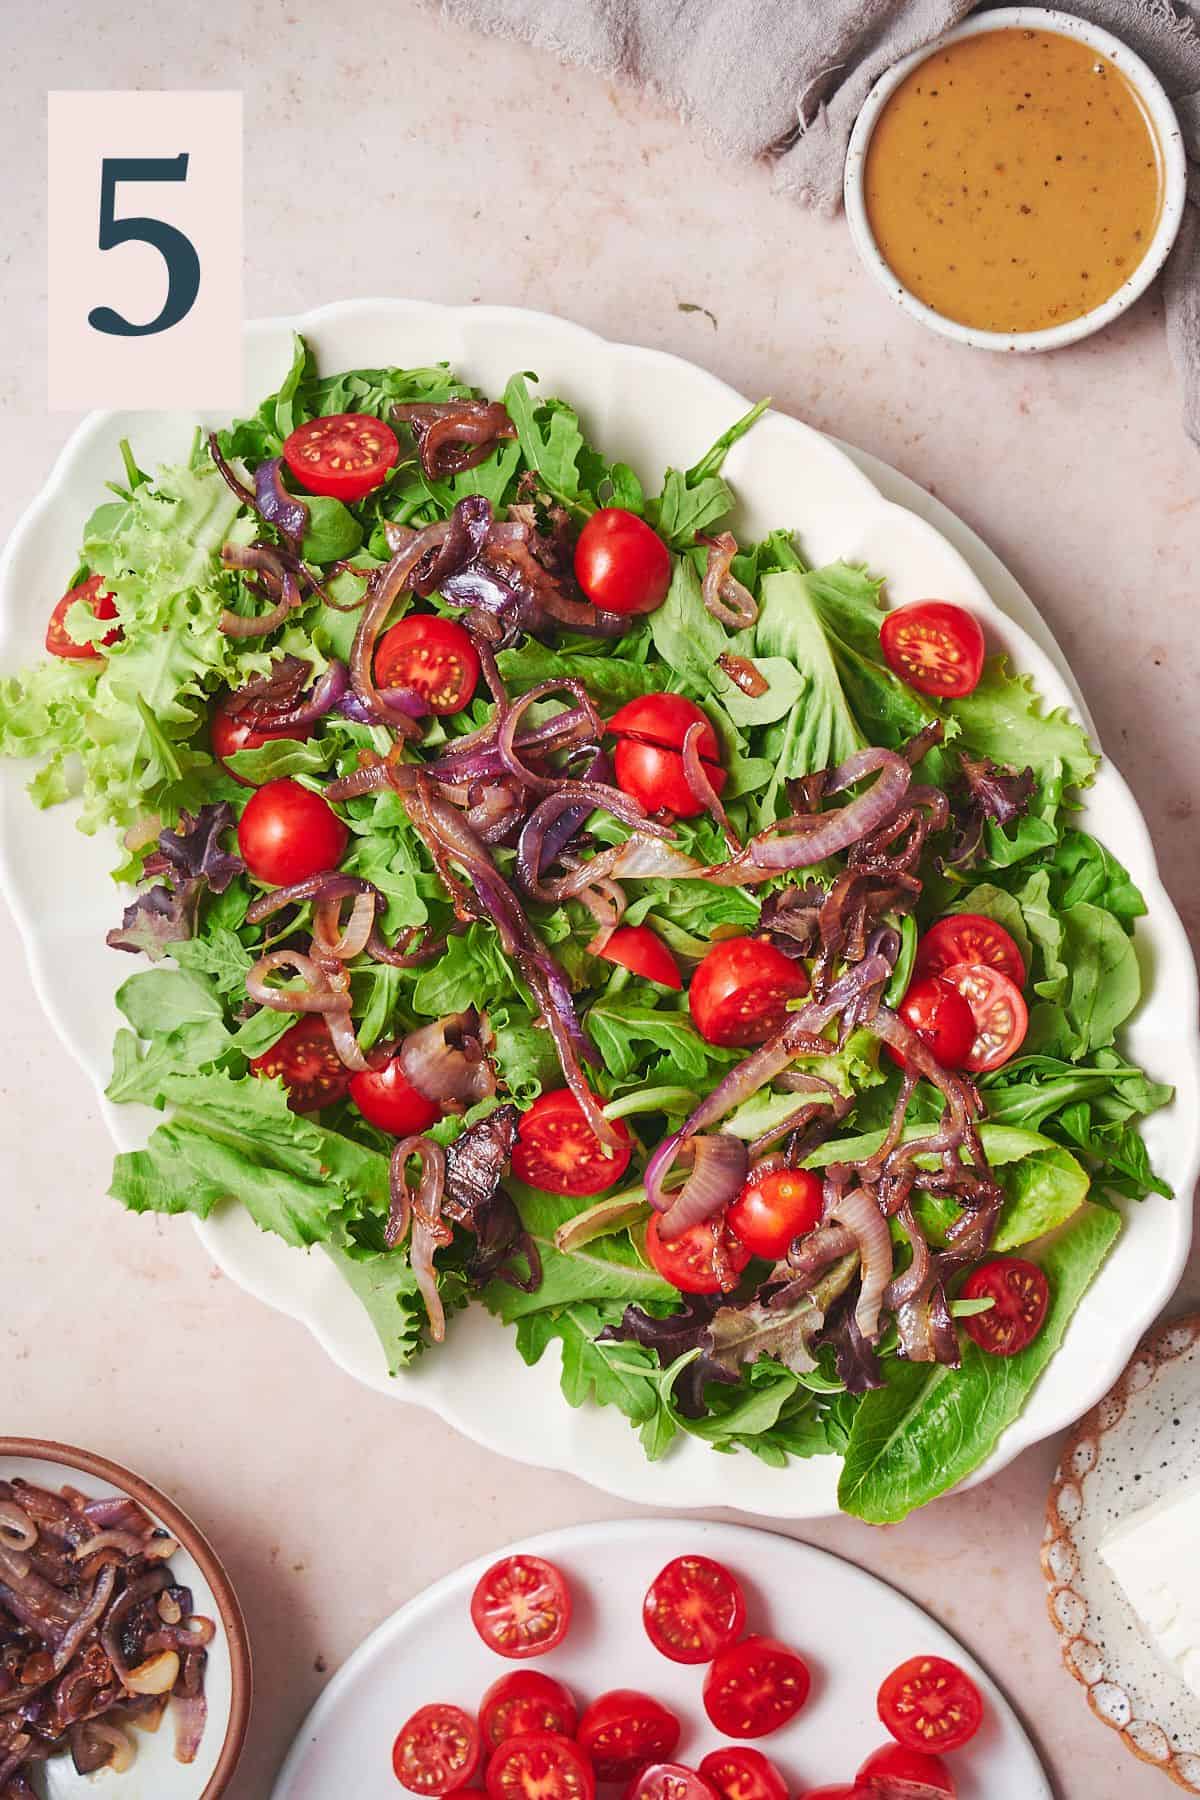 mixed greens layered with tomatoes and grilled red onions.